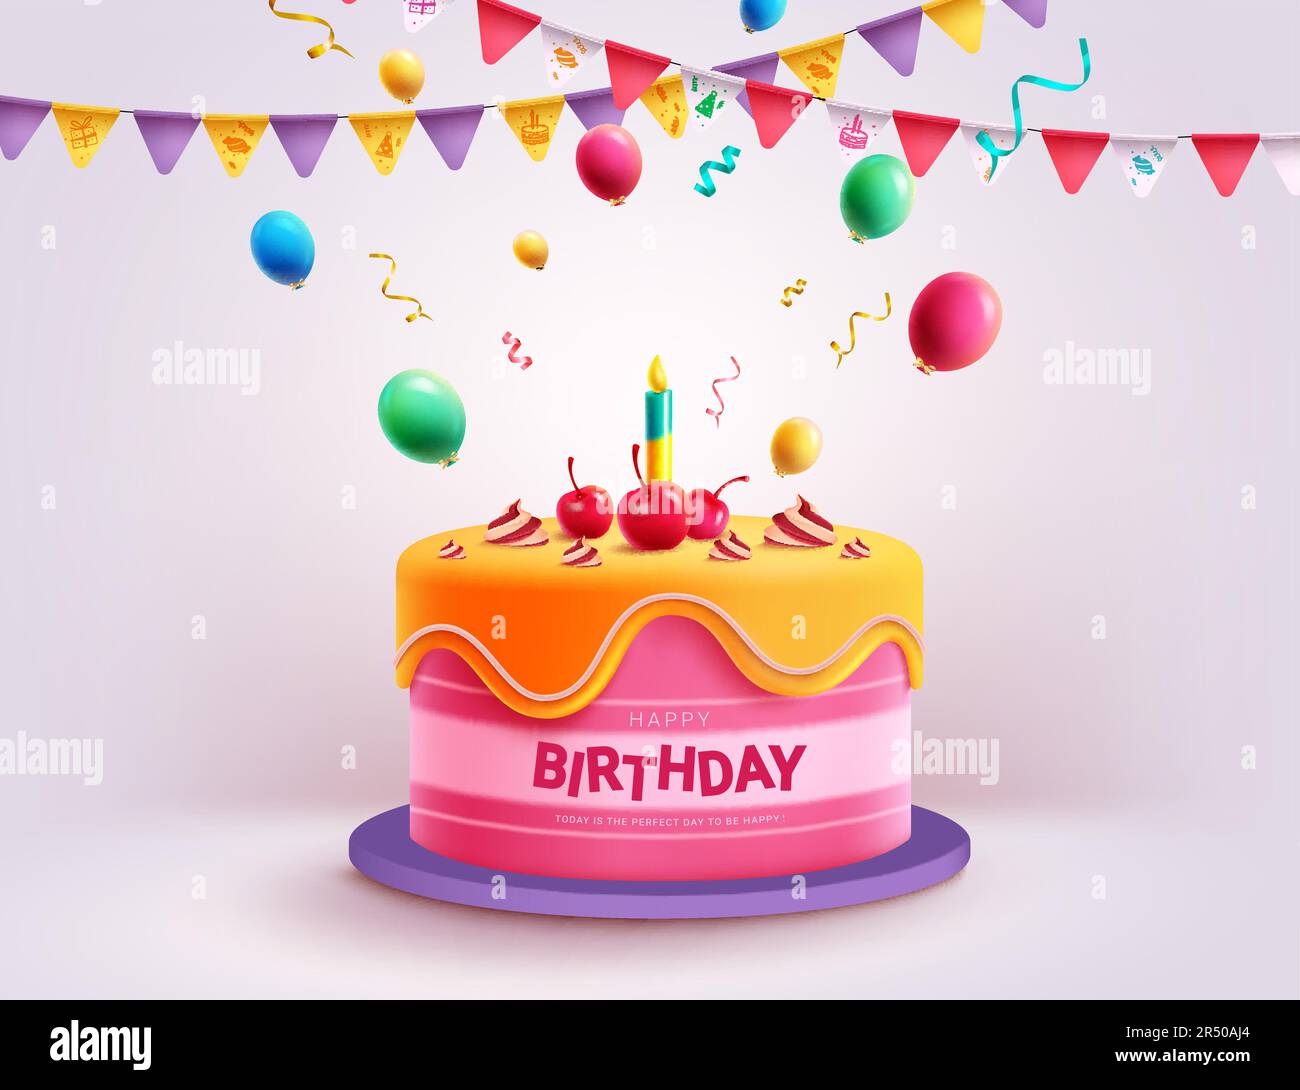 Birthday cake vector design. Happy birthday text in yummy dessert cake with colorful balloons and pennants party elements. Vector illustration Stock Vector